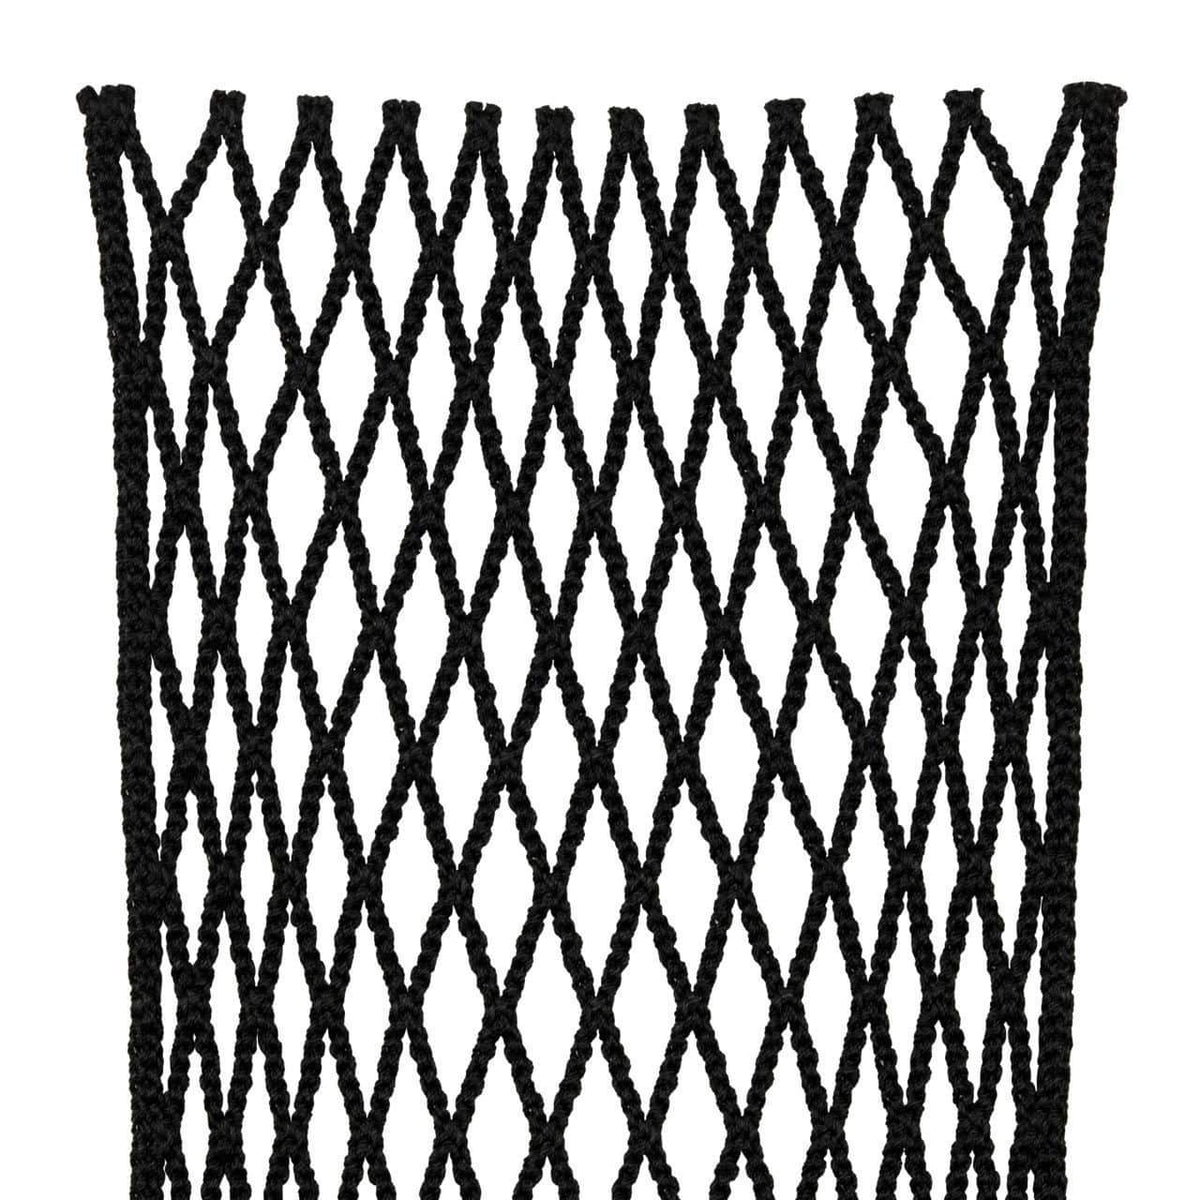 StringKing Grizzly 2s Goalie Lacrosse Mesh